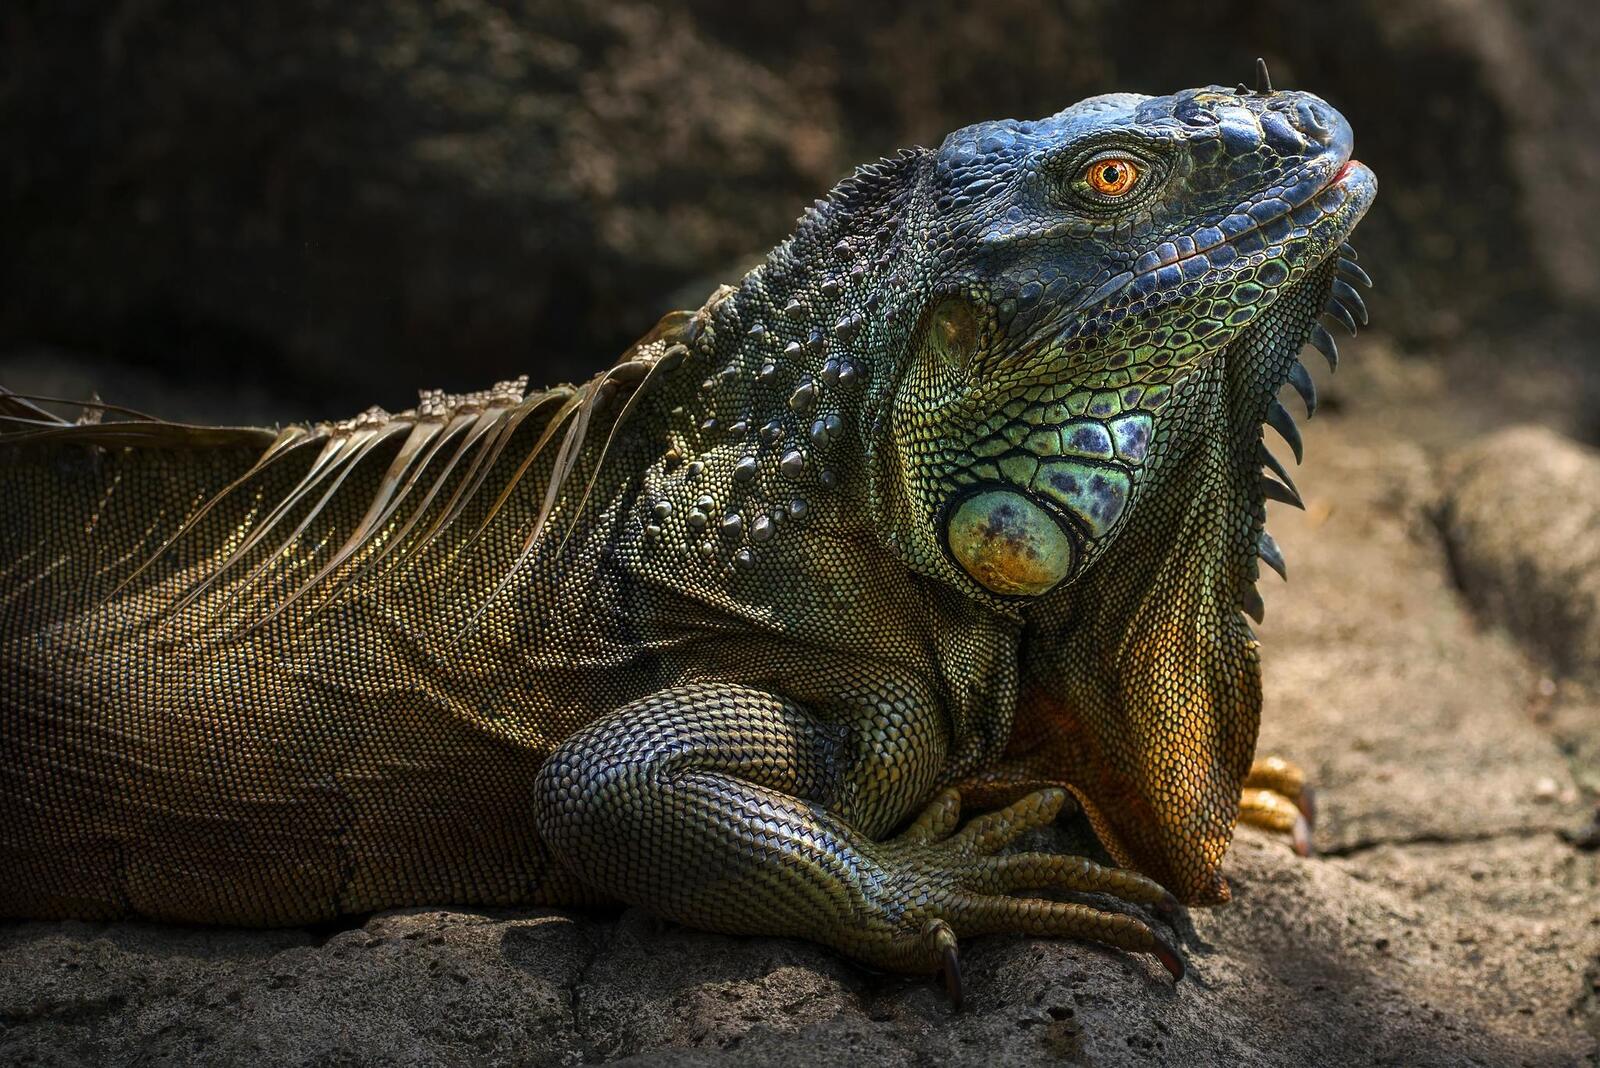 Wallpapers iguana a large herbivorous lizard of the family of iguanids animals on the desktop